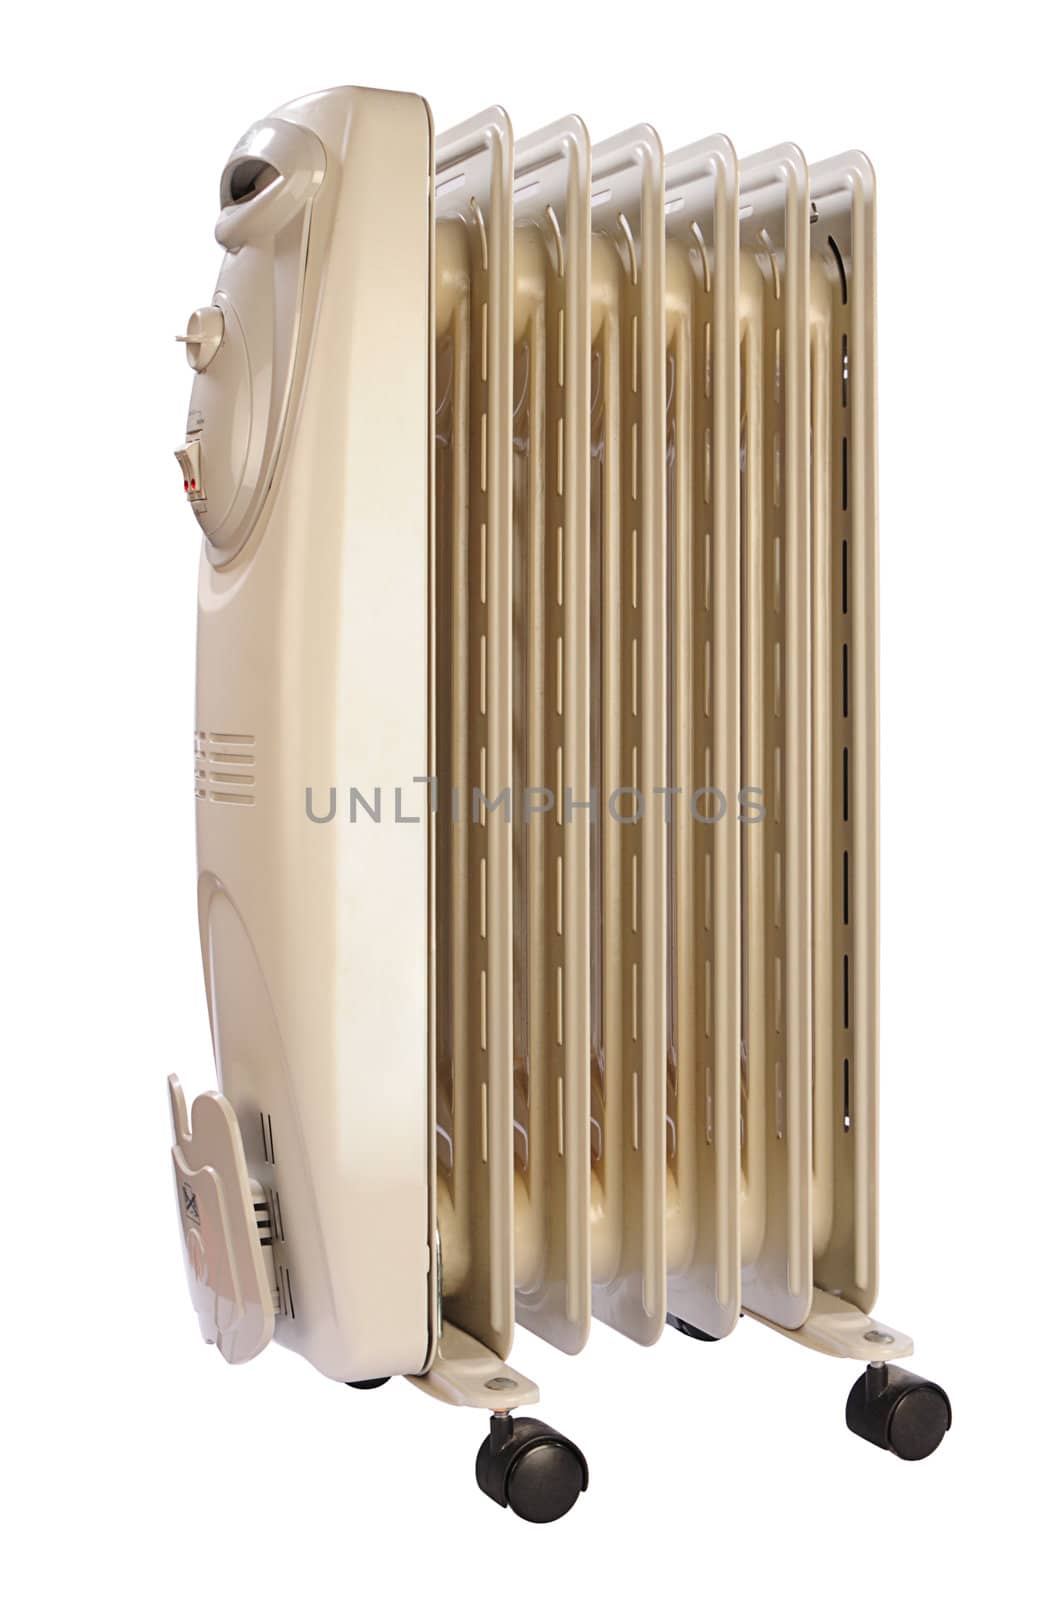 Electric oil heater on white with clipping path